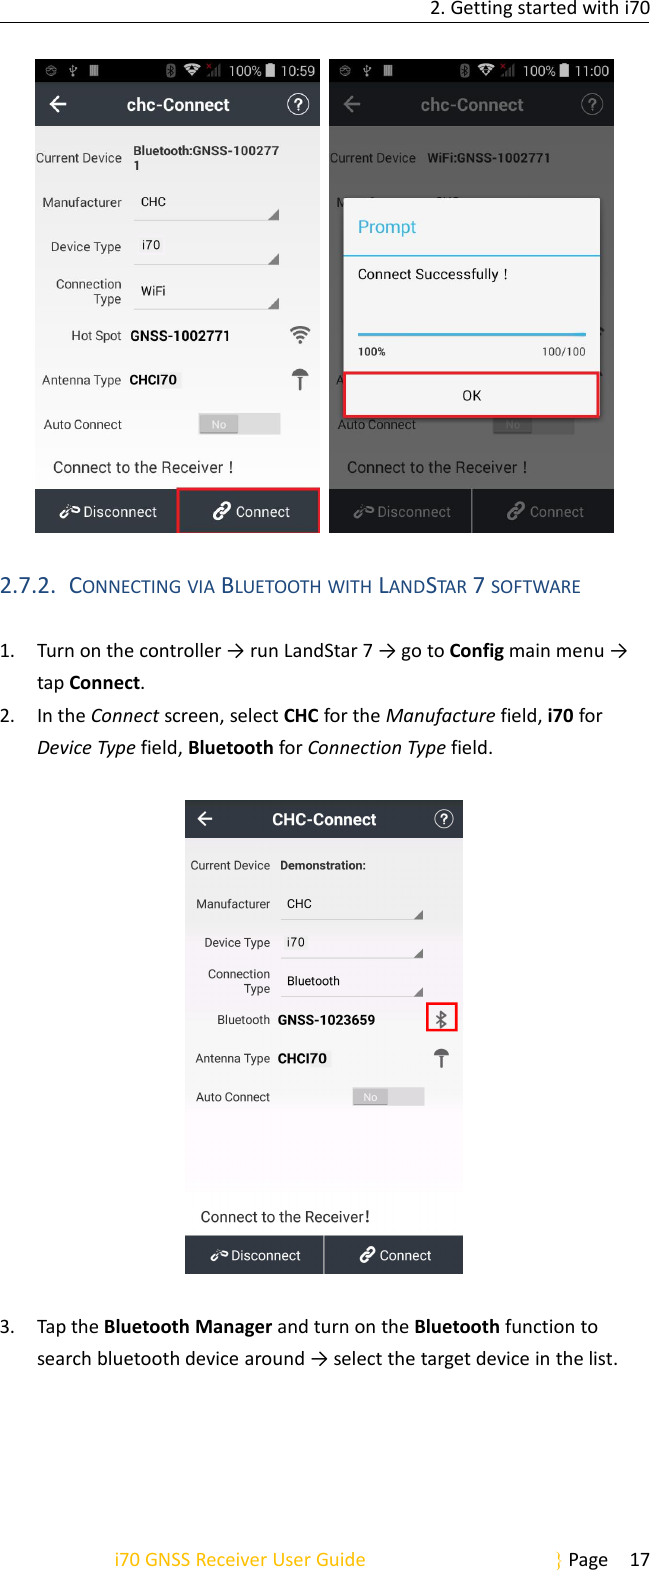 2. Getting started with i70i70 GNSS Receiver User Guide Page 172.7.2. CONNECTING VIA BLUETOOTH WITH LANDSTAR 7SOFTWARE1. Turn on the controller → run LandStar 7 → go to Config main menu →tap Connect.2. In the Connect screen, select CHC for the Manufacture field, i70 forDevice Type field, Bluetooth for Connection Type field.3. Tap the Bluetooth Manager and turn on the Bluetooth function tosearch bluetooth device around → select the target device in the list.